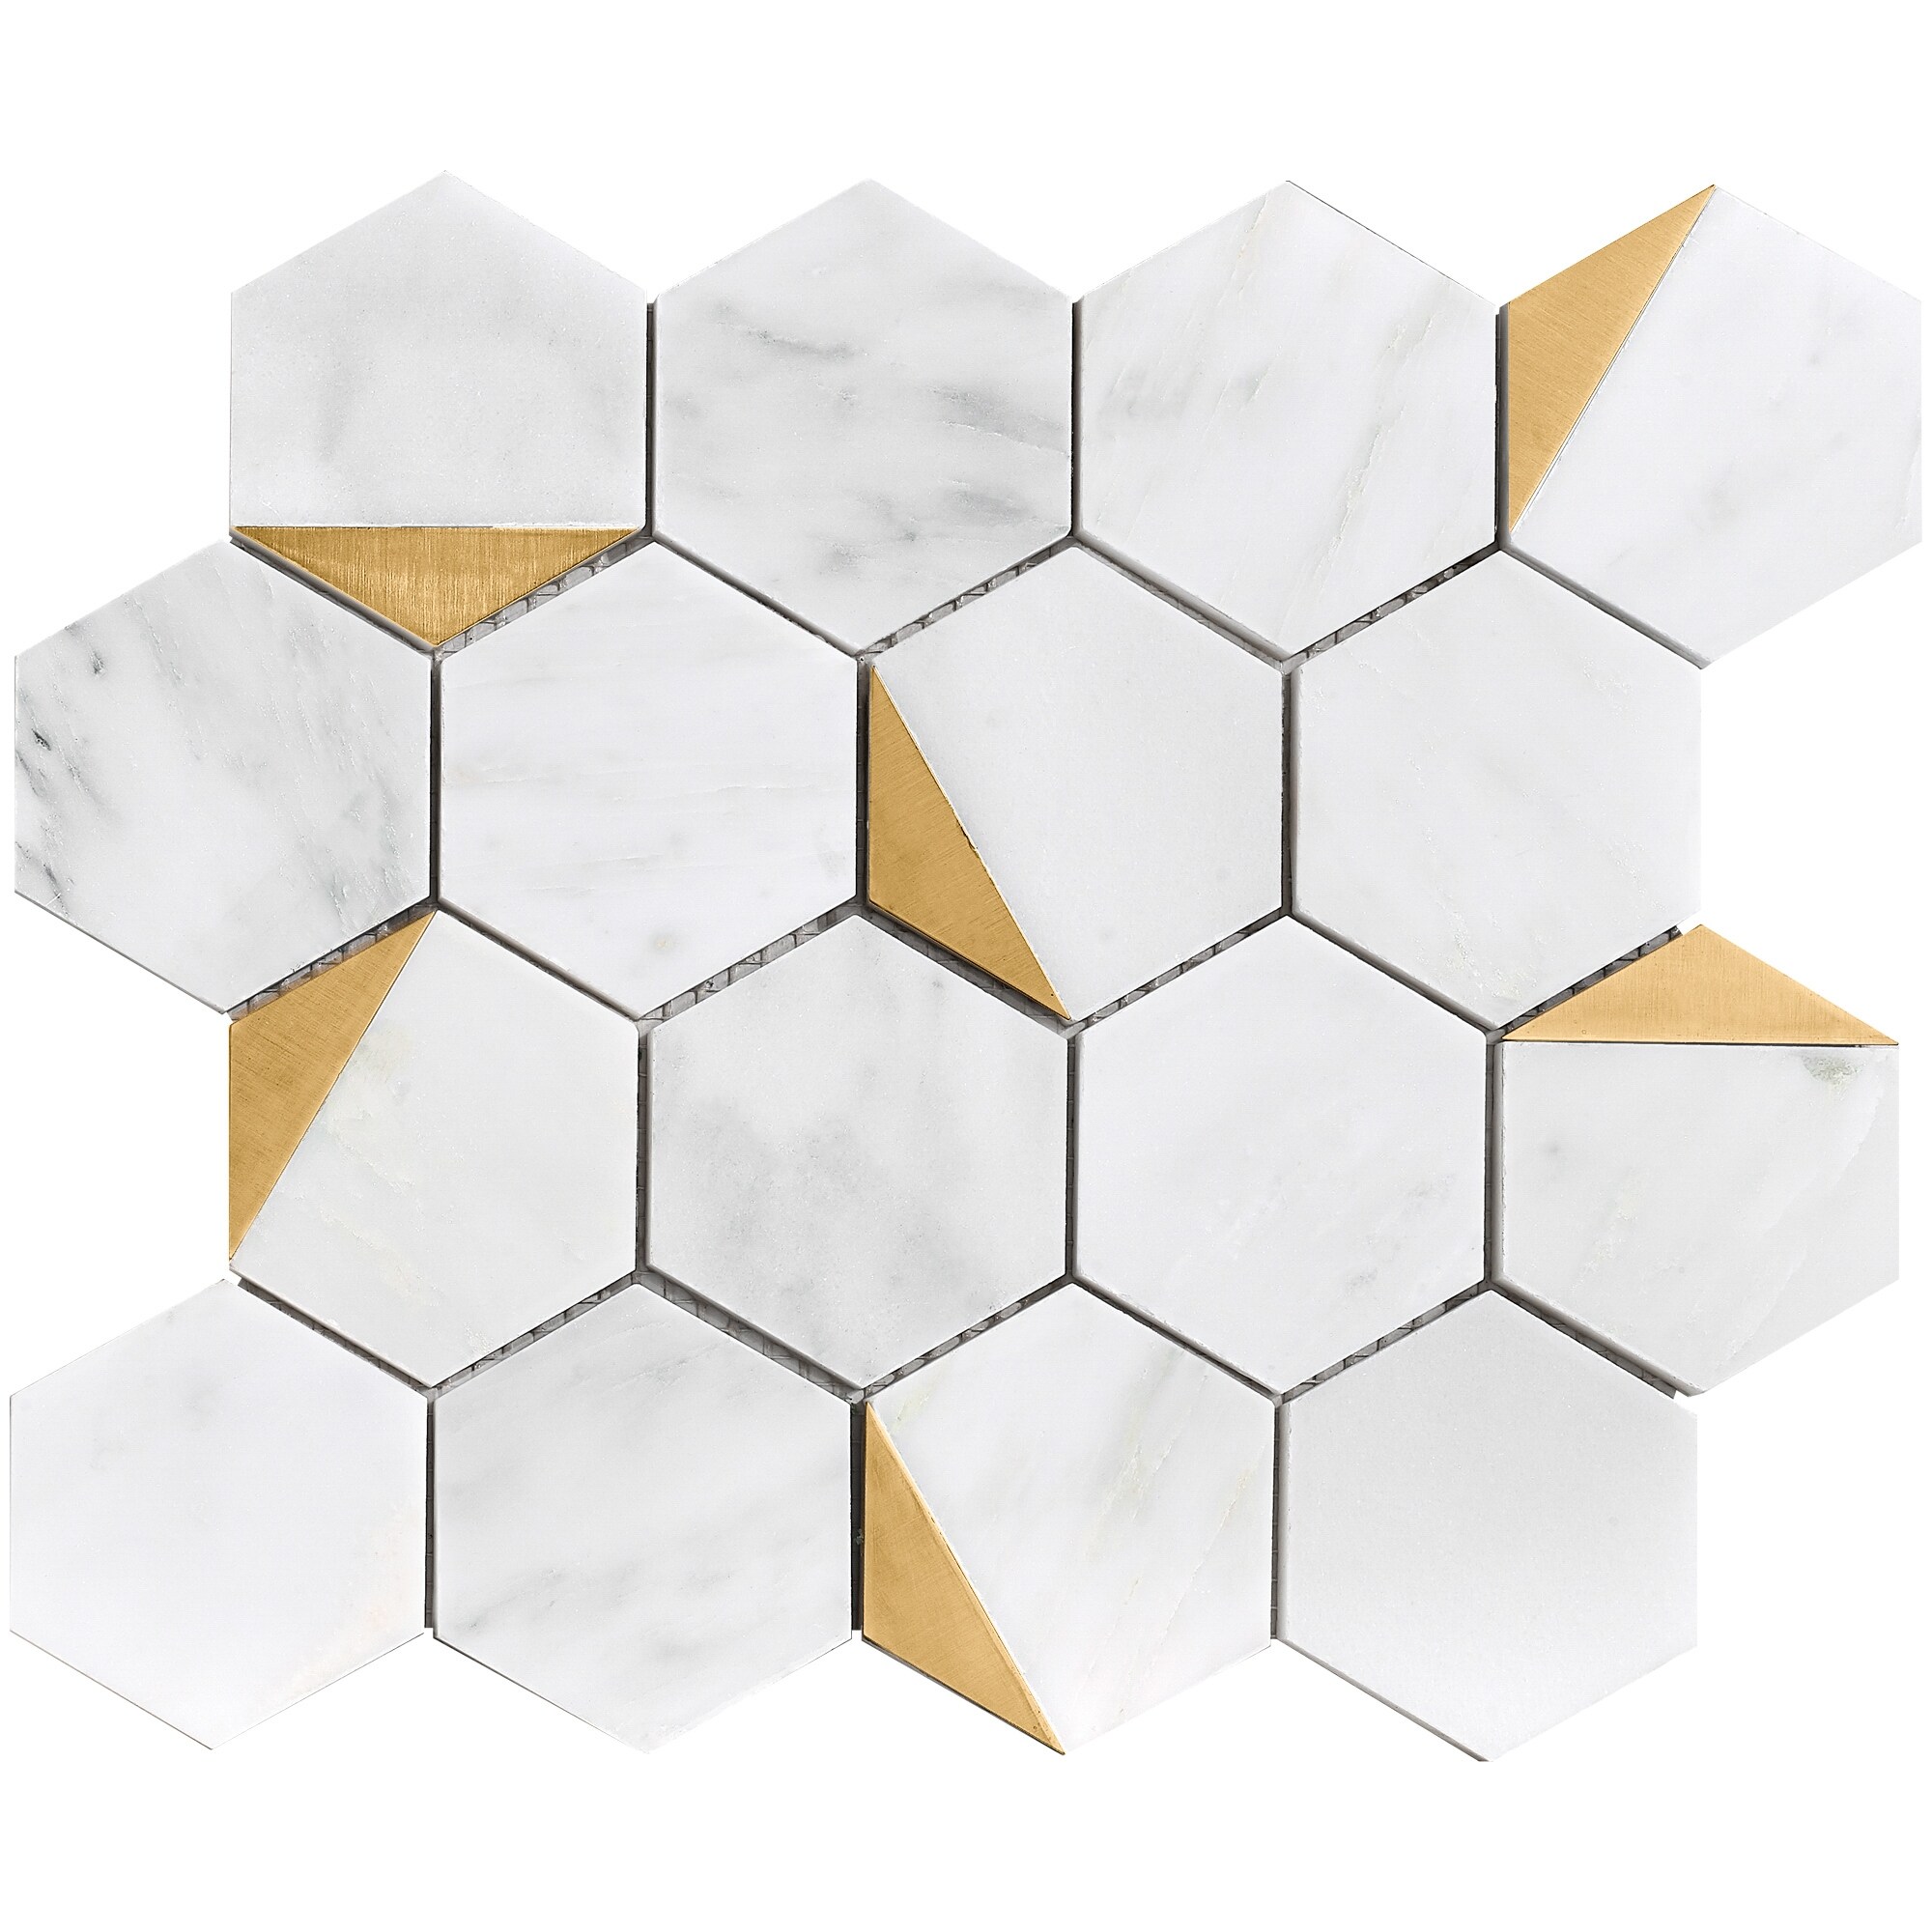 https://ak1.ostkcdn.com/images/products/is/images/direct/b6cff67ac9b712ed3e7adf2cf3ded46e6ded1201/TileGen.-Natural-Bianco-3%22-x-3%22-Hexagon-Metal-and-Marble-Mosaic-Tile-in-Gold-White-Wall-Tile-%2810-sheets-8.5sqft.%29.jpg